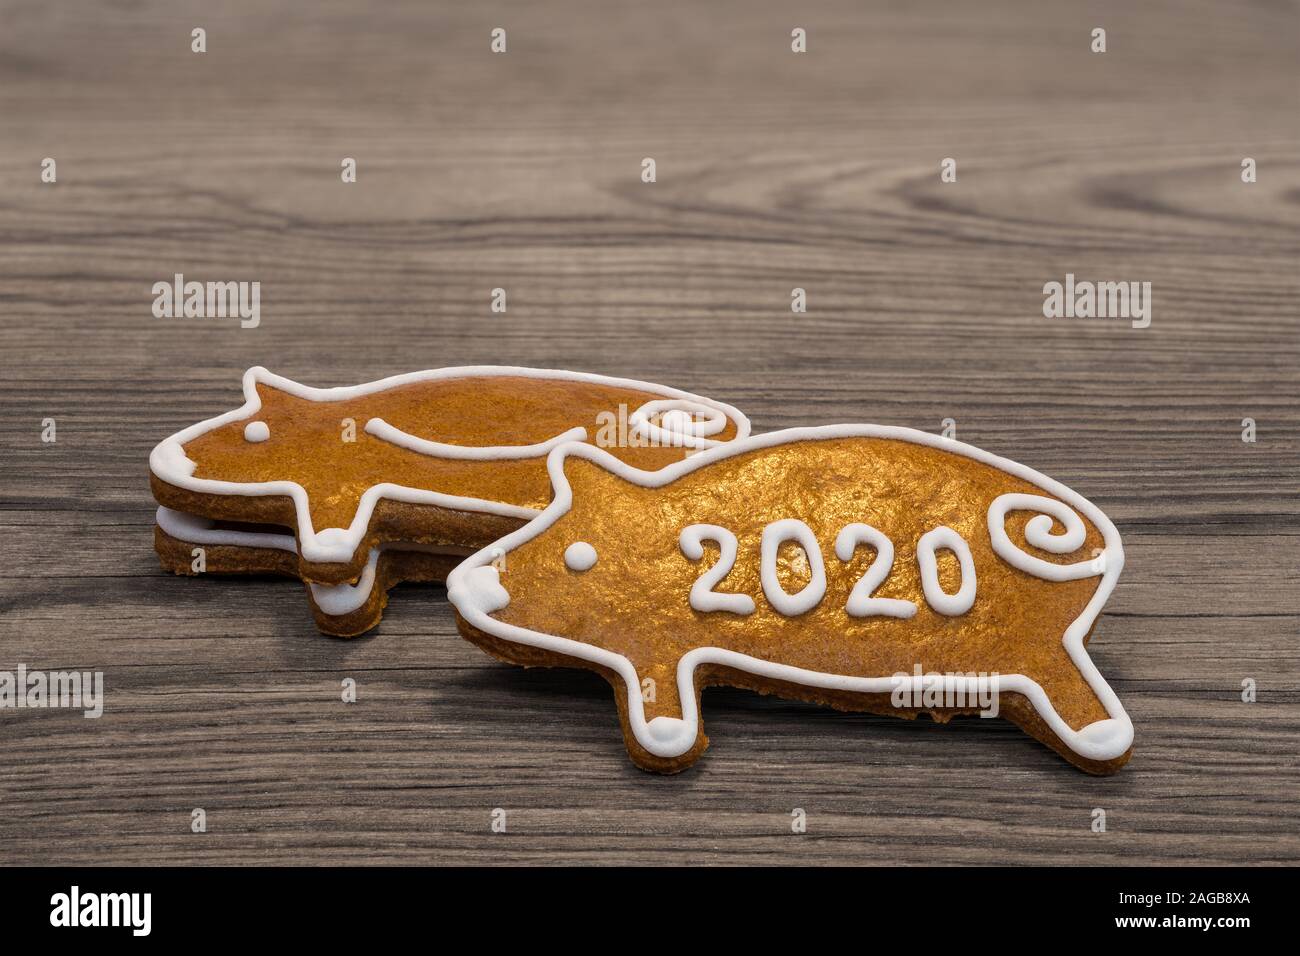 New Year 2020. Golden pig shaped gingerbread cookies for good luck. Cute sweet piggies from traditional aromatic Xmas pastry on brown wood background. Stock Photo